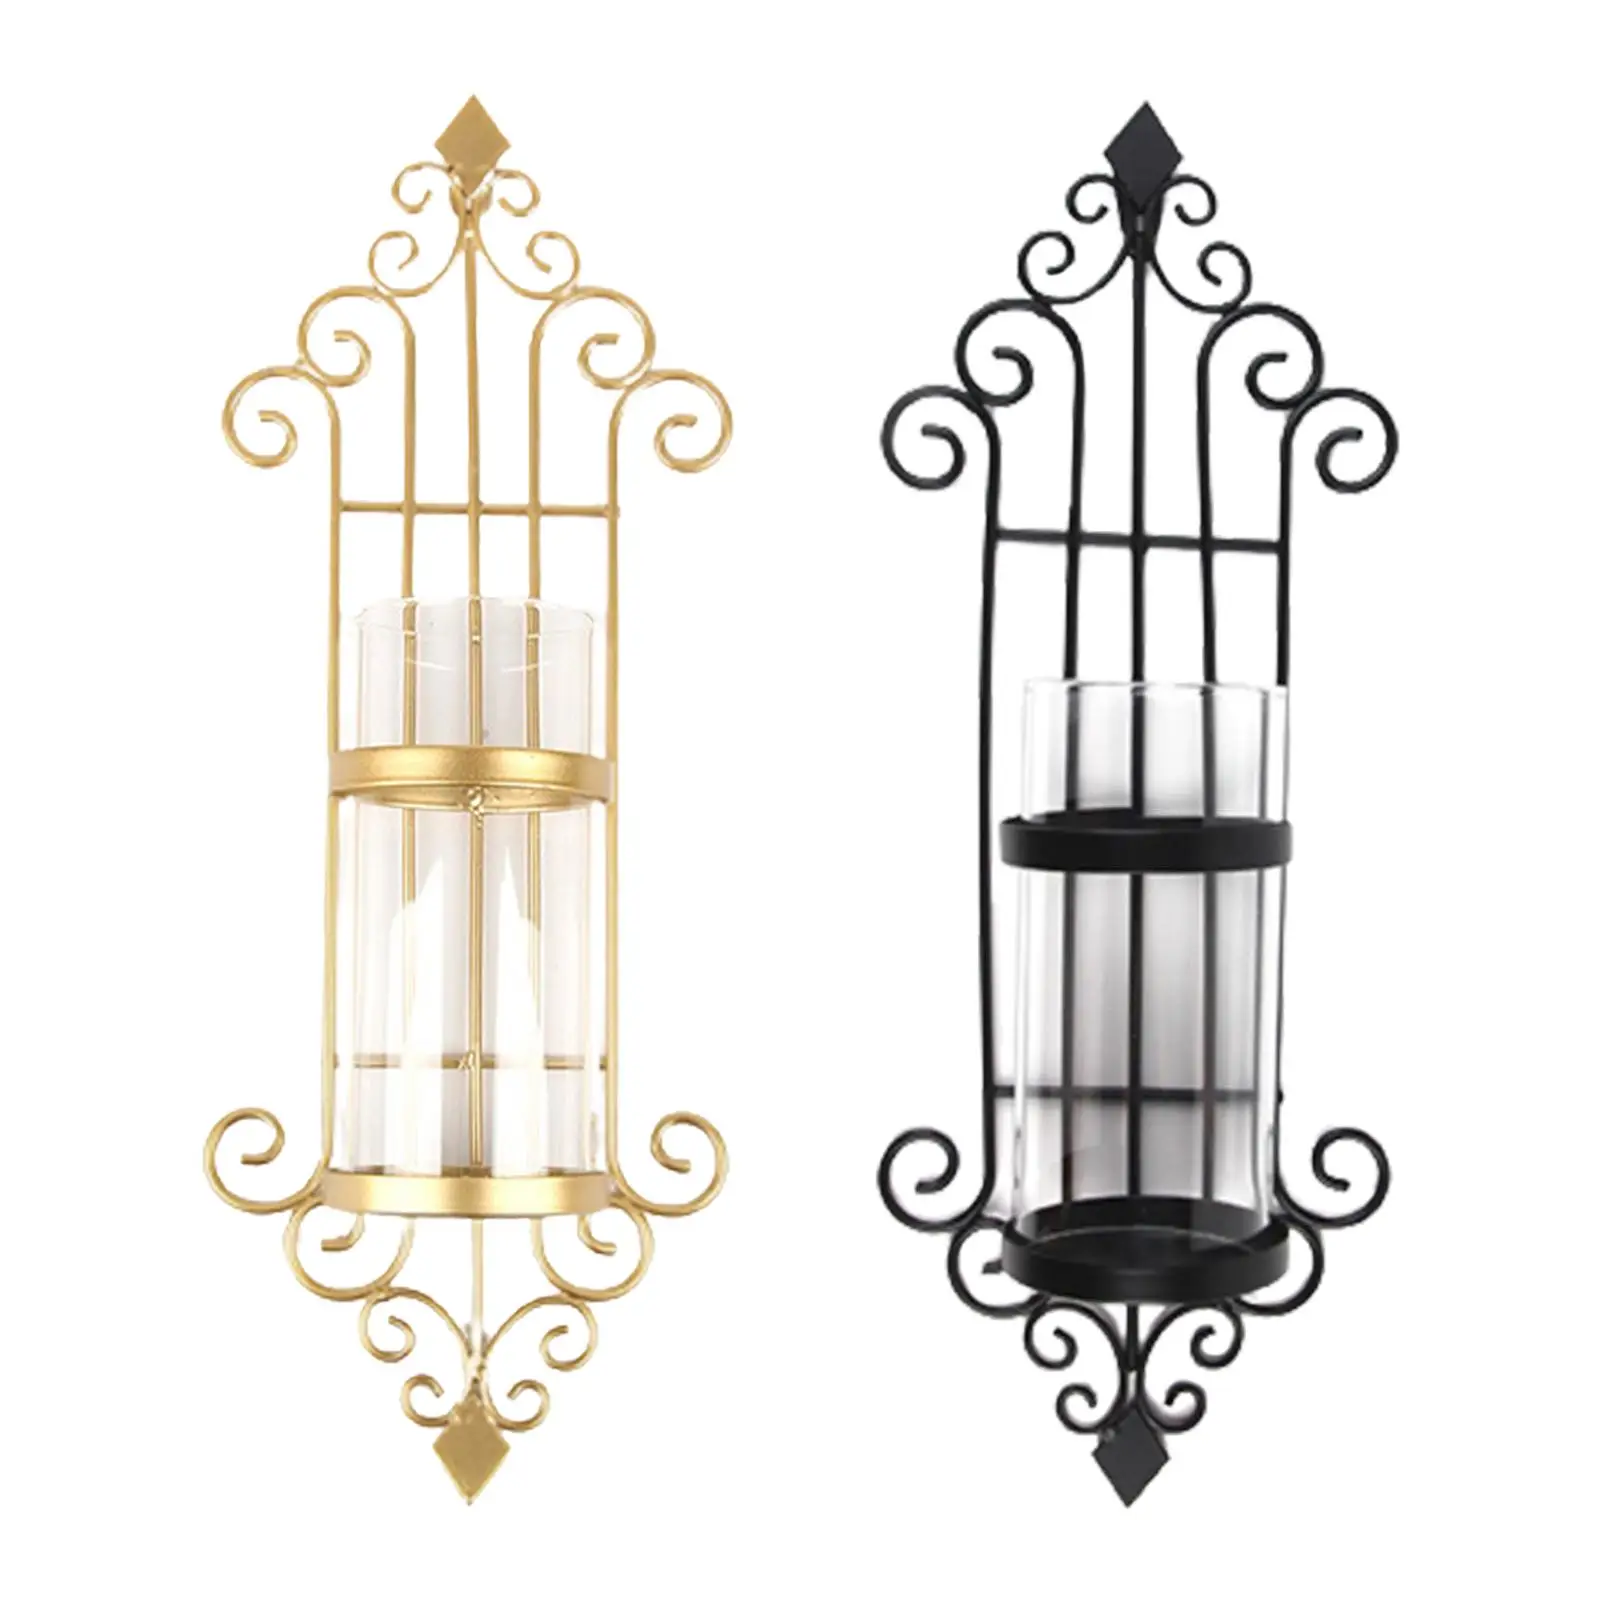 2Pieces Wrought Iron Anti Rust Candlestick Hanging Wall Candle Holder Bedroom Hotel Party Home Decor